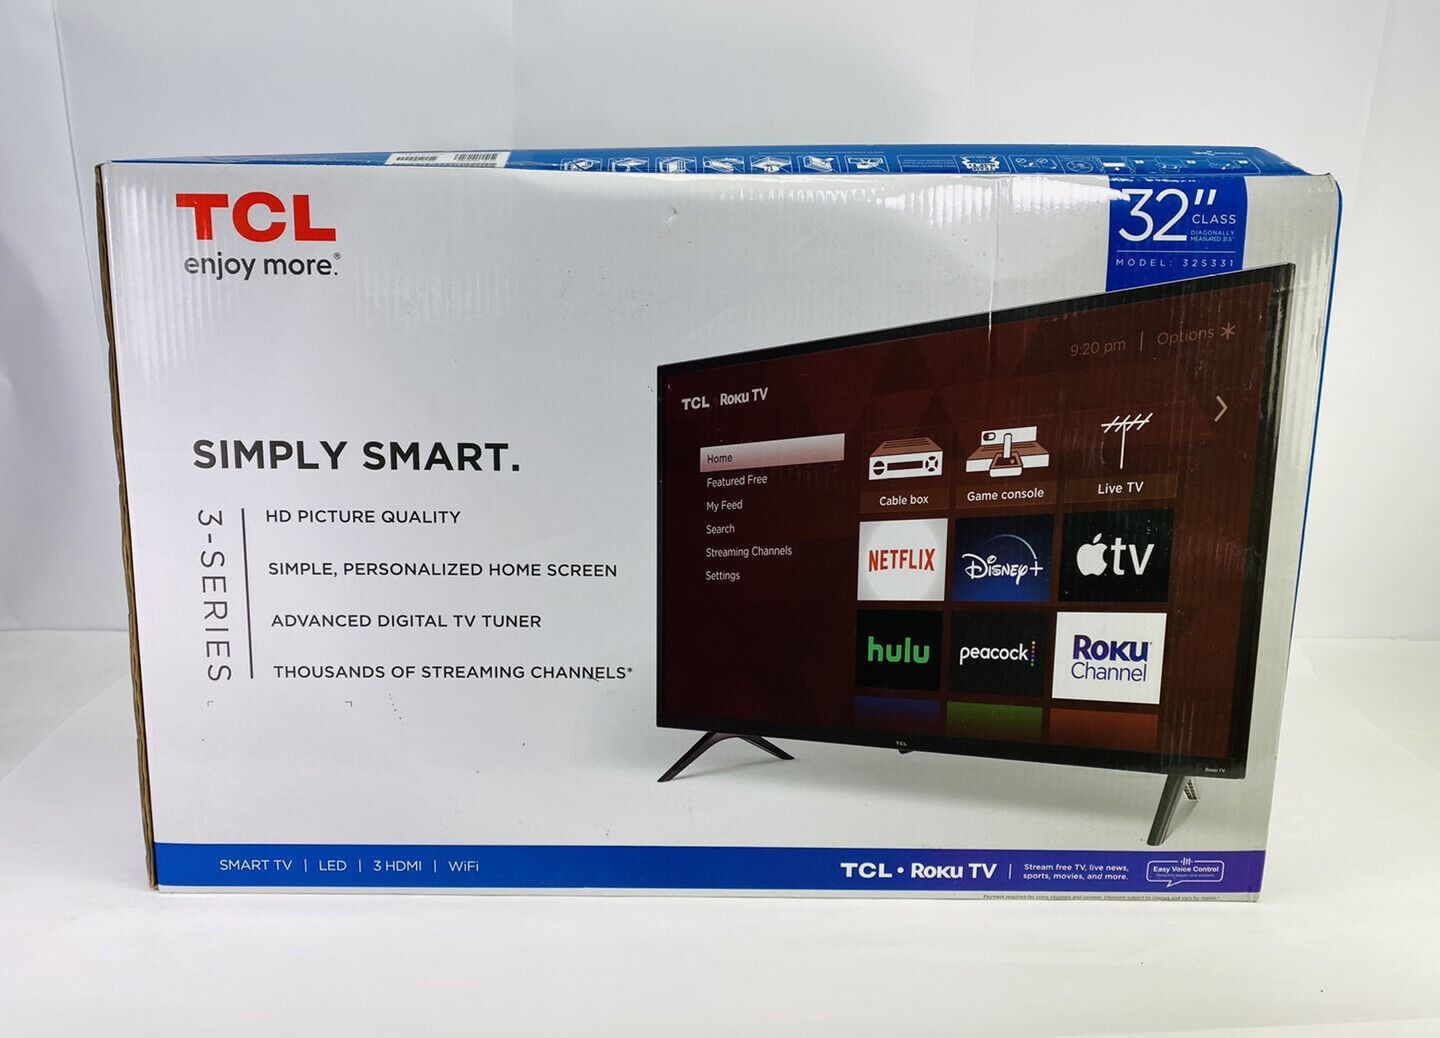 tv - Tv TCL 32" CLASE 3-SERIES HD LED 32S301 32´´ SMART 1